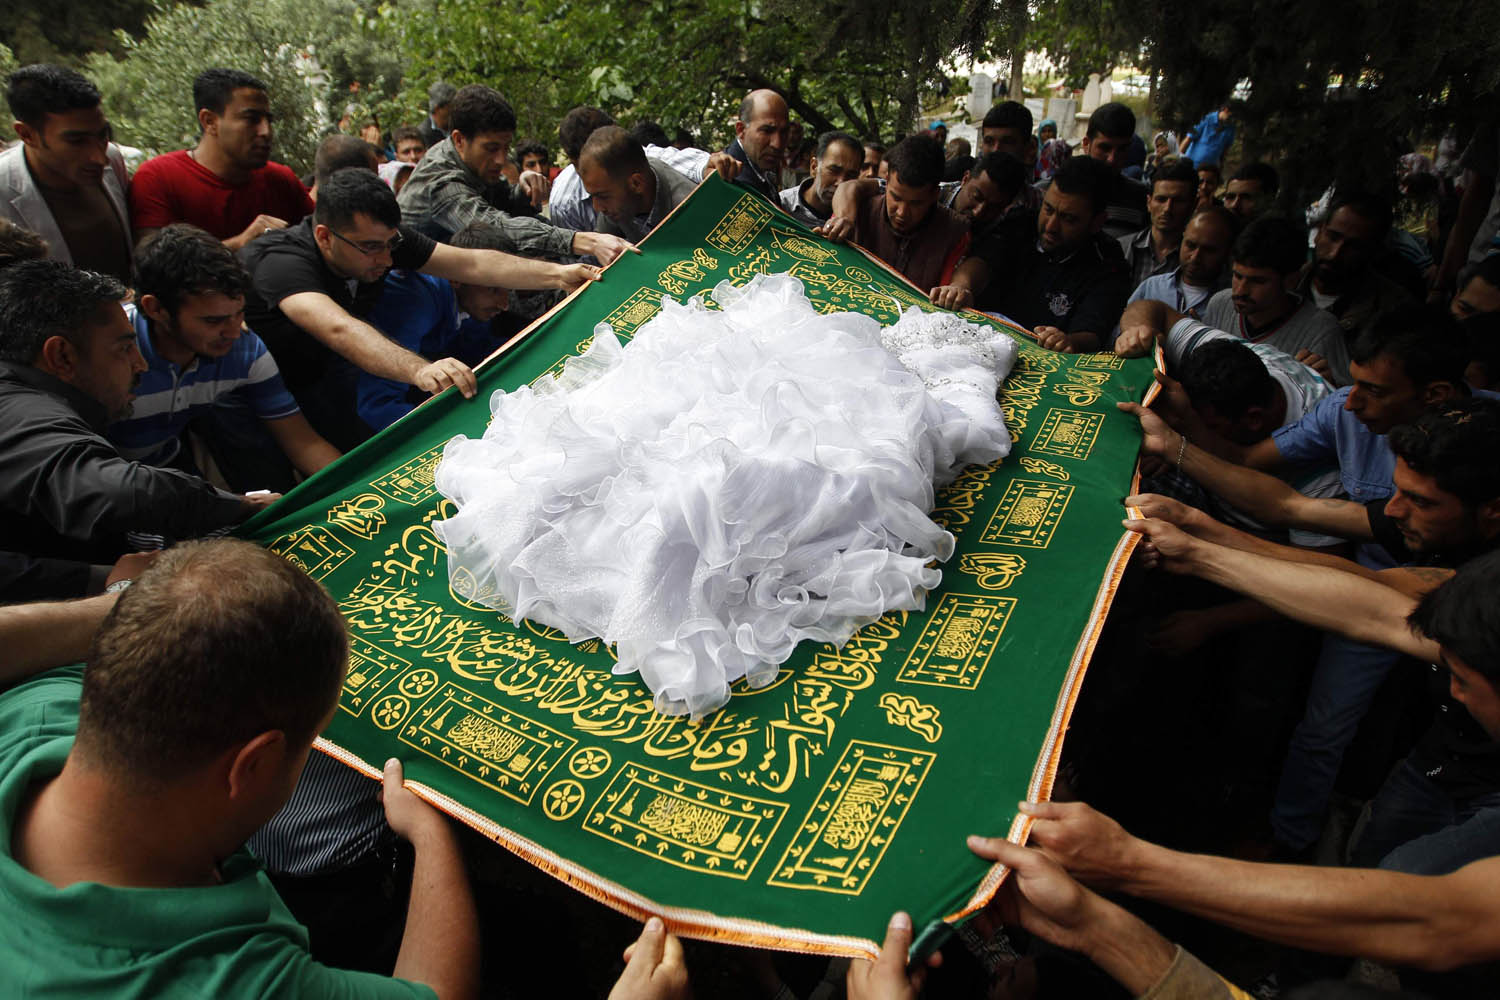 Relatives cover the body of 22-year-old Ayten Calim with a Muslim prayer rug and her wedding dress as they lower her into a grave in the town of Reyhanli in Hatay province near the Turkish-Syrian border